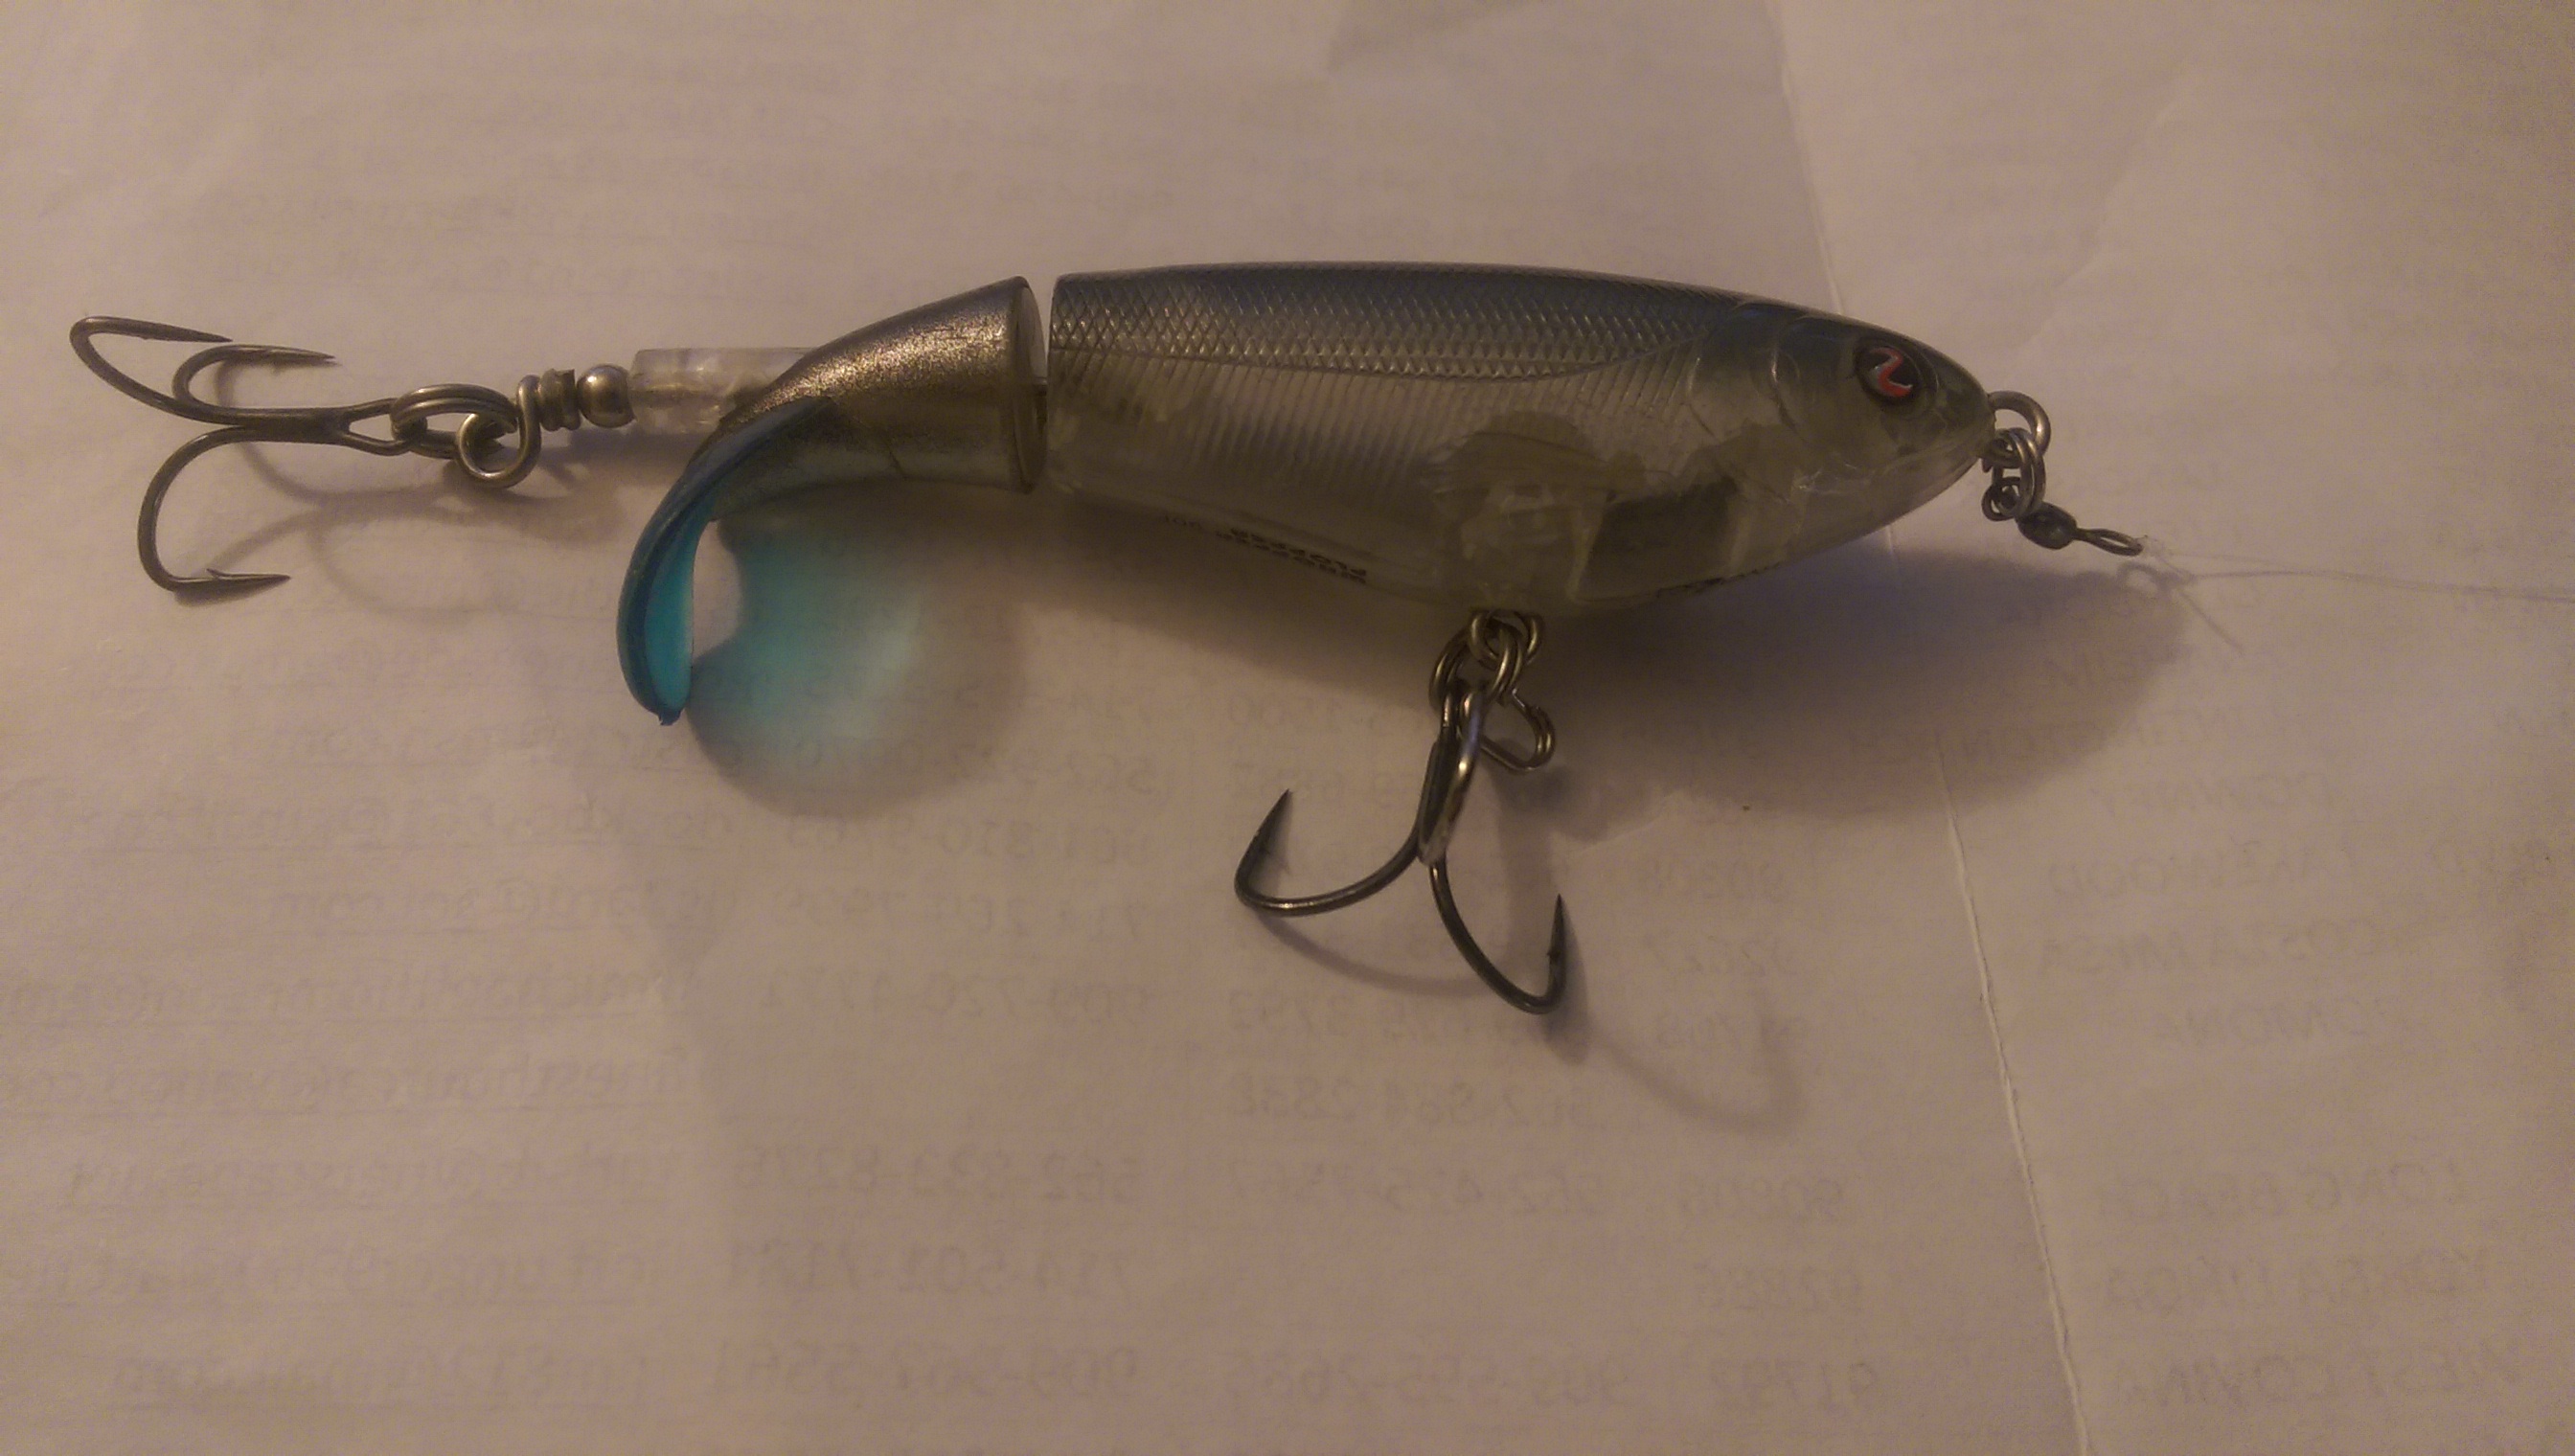 Swivel On A whopper Plopper? - Fishing Tackle - Bass Fishing Forums